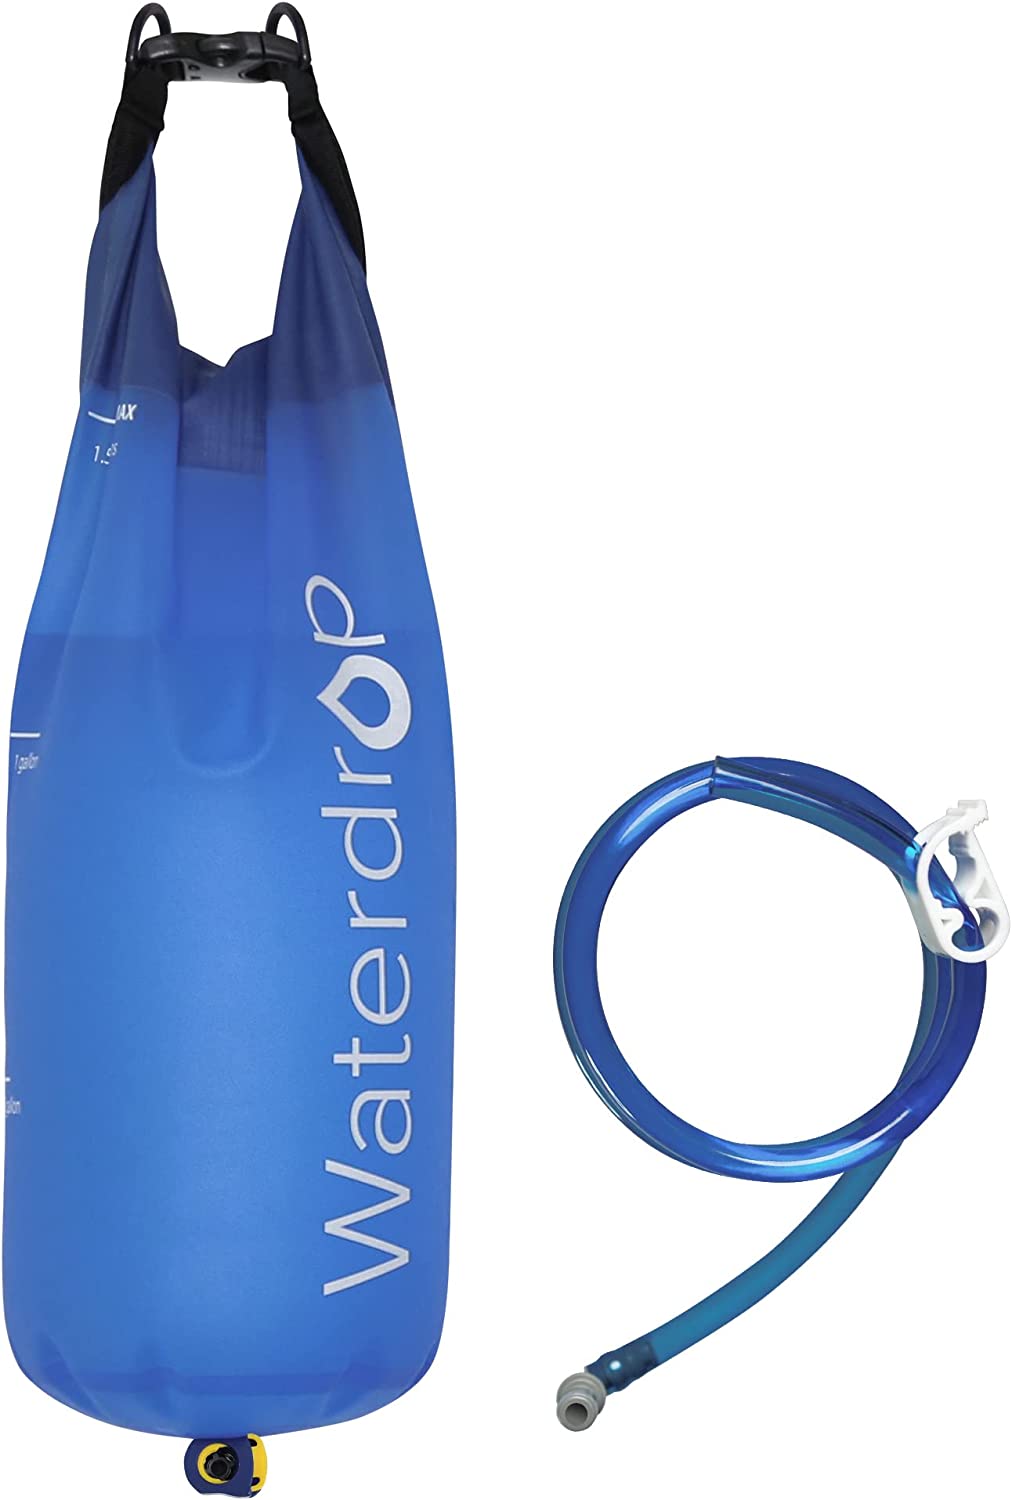 Waterdrop Gravity Water Bag for Camping, Travel, Backpacking, Hiking and Emergency, Compatible with Water Filter Straw, Flex Foldable, 1.5 Gal Bag